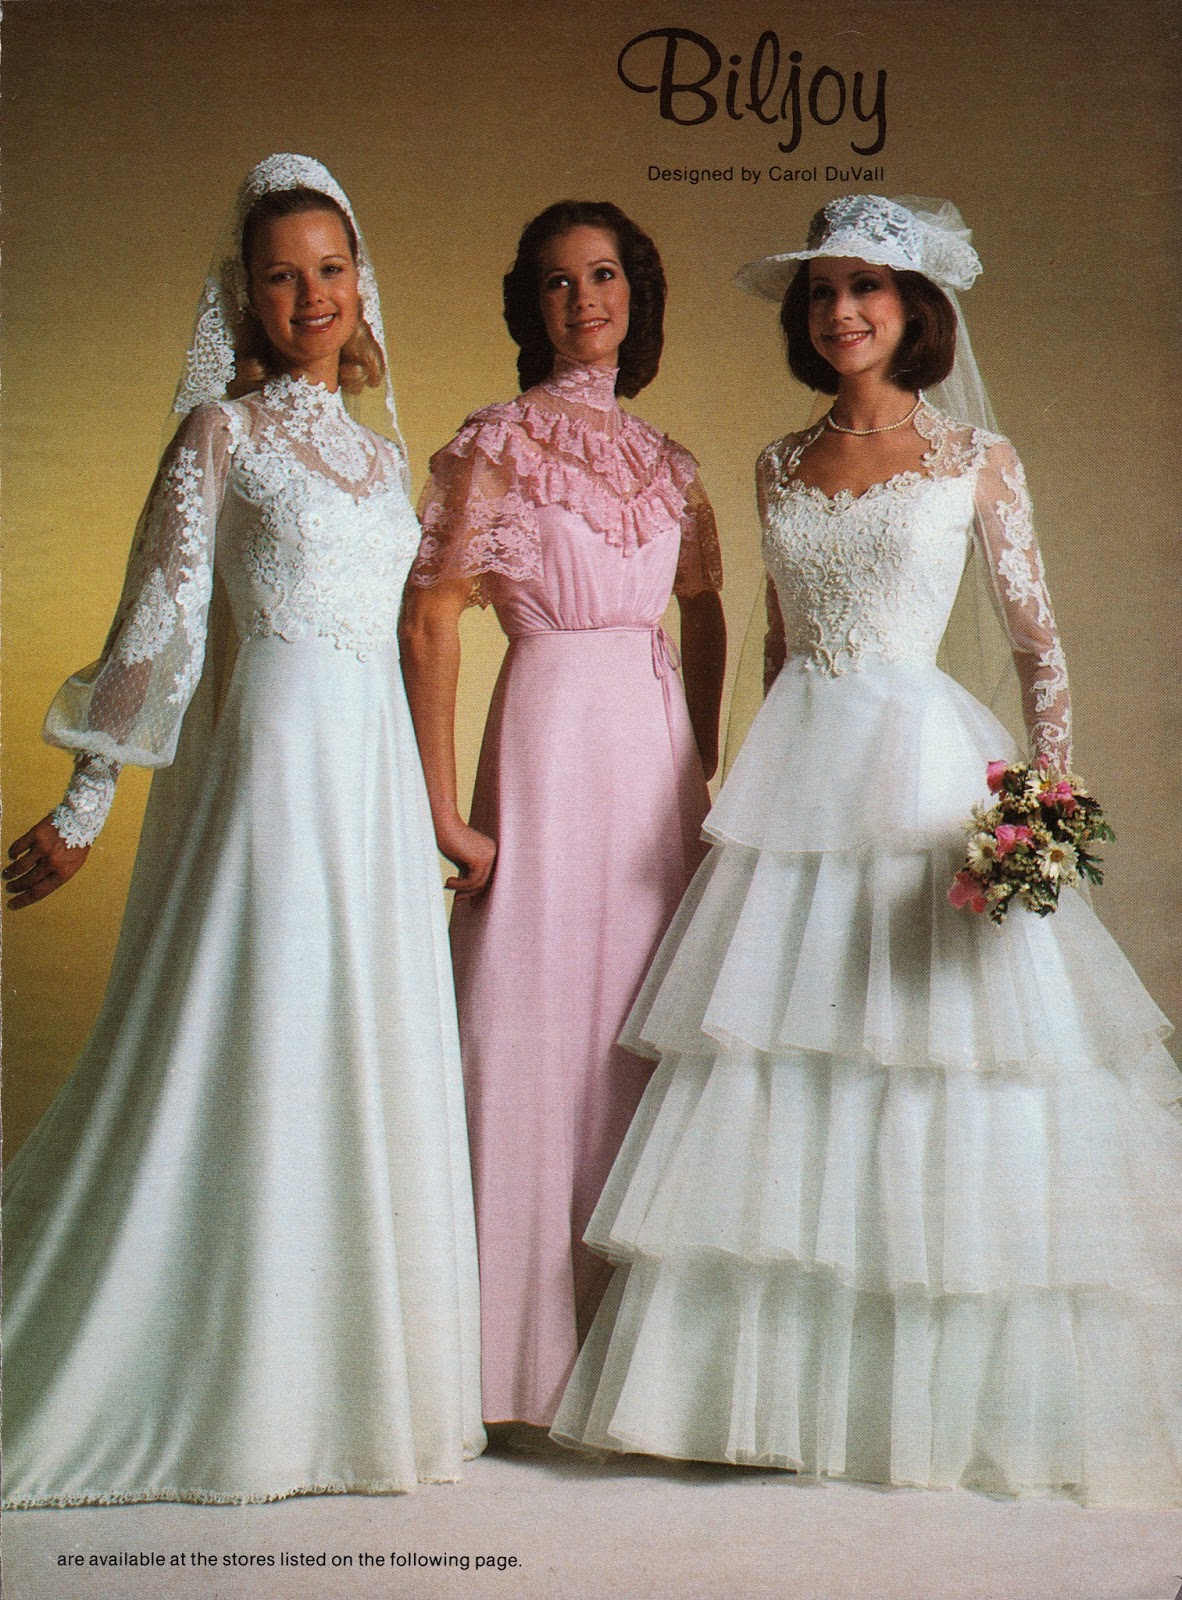 Kathy Loghry Blogspot: That's So 70s: Say Yes to the Dress - Part 4!!